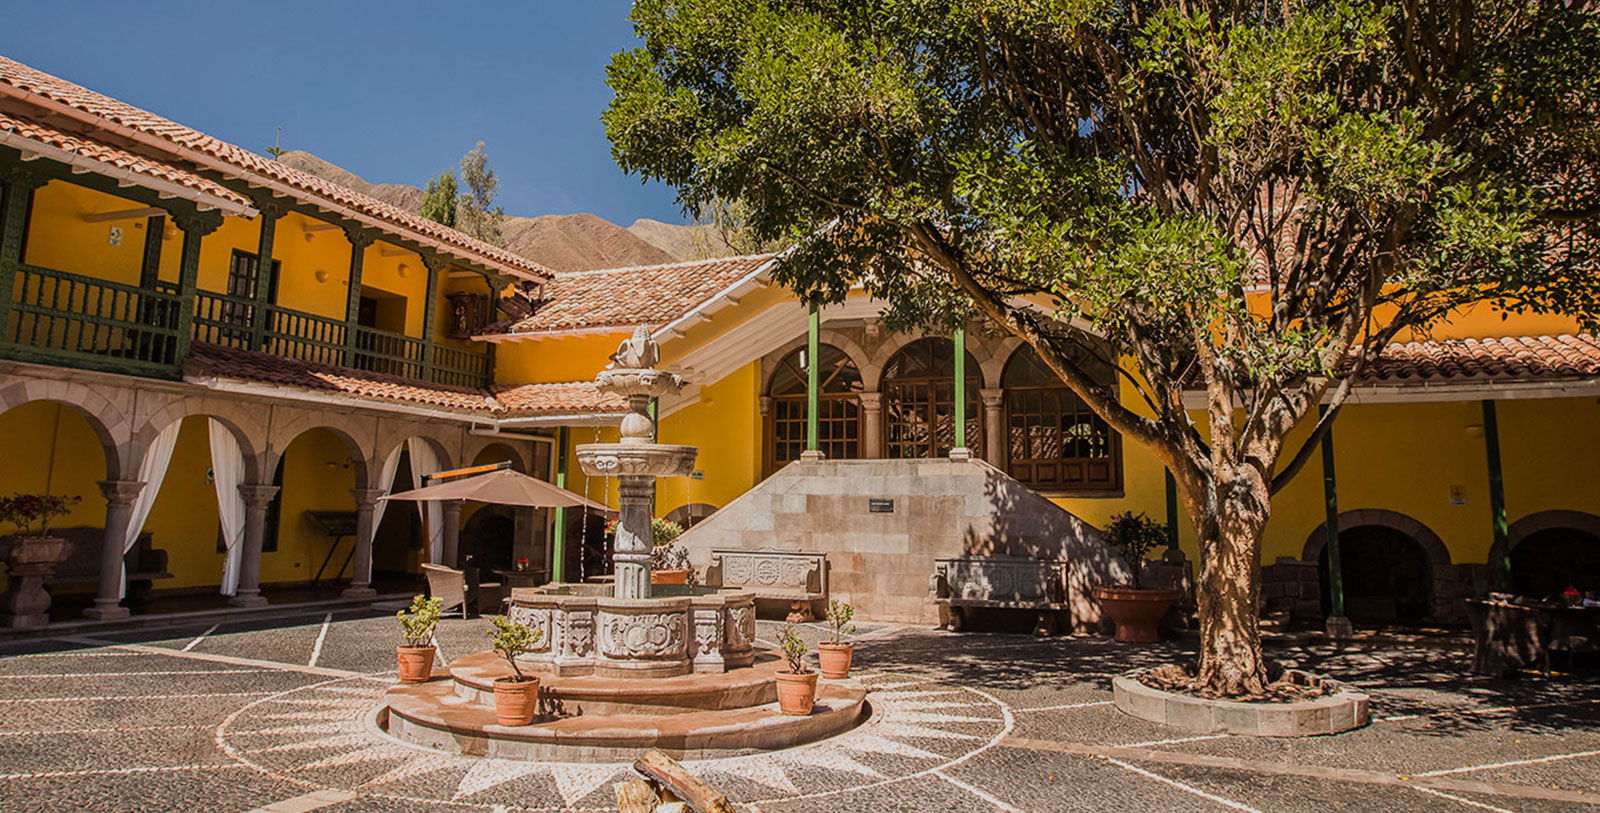 Discover the beautiful Spanish Colonial architecture of the Aranwa Sacred Valley.